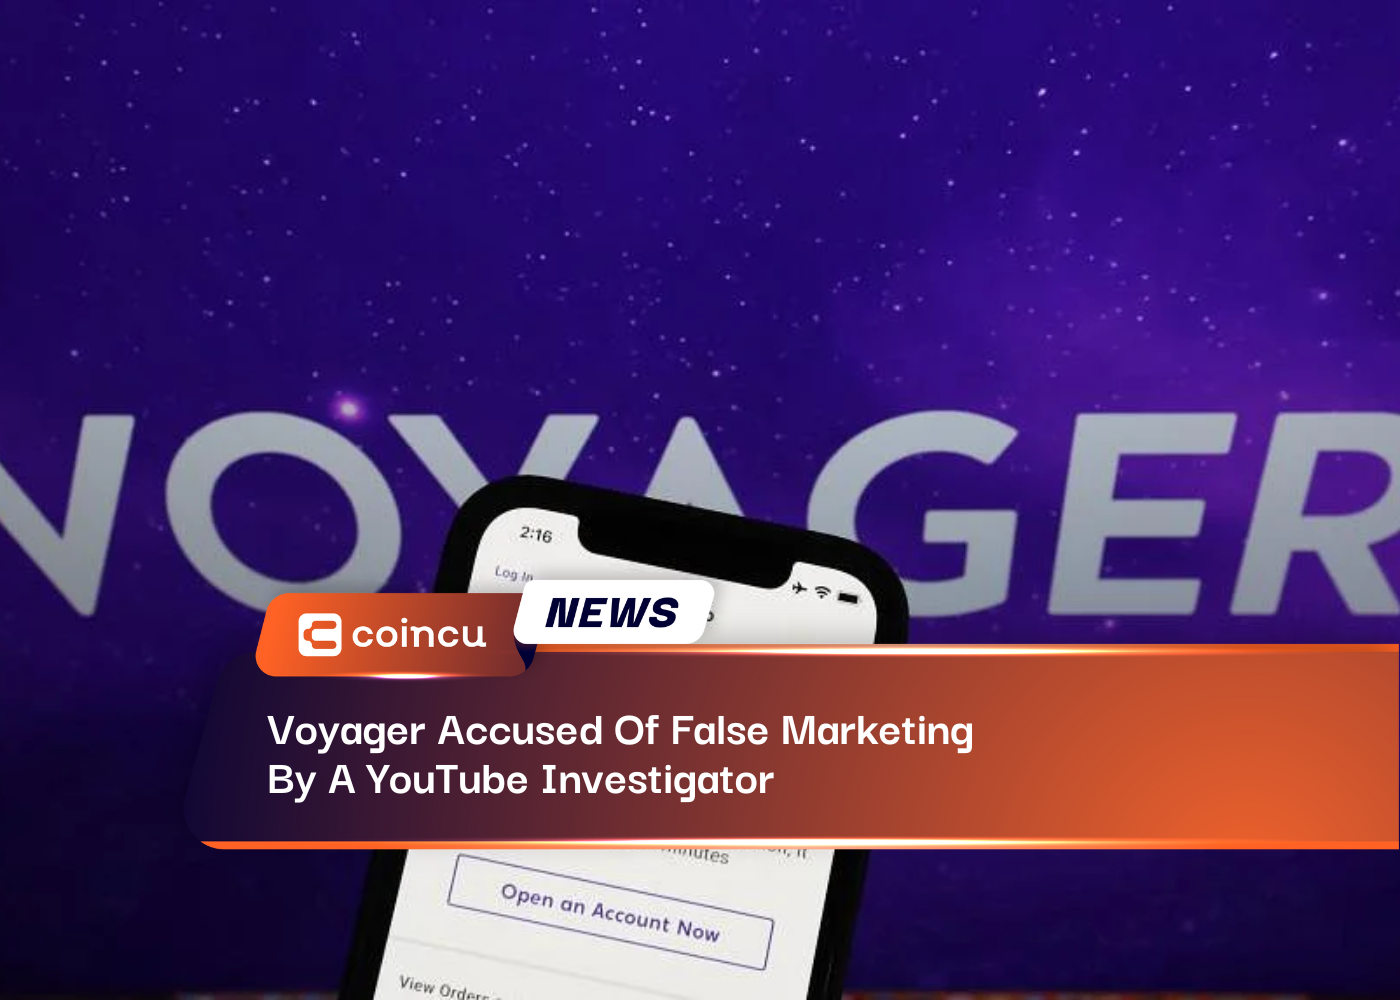 Voyager Accused Of False Marketing By A YouTube Investigator